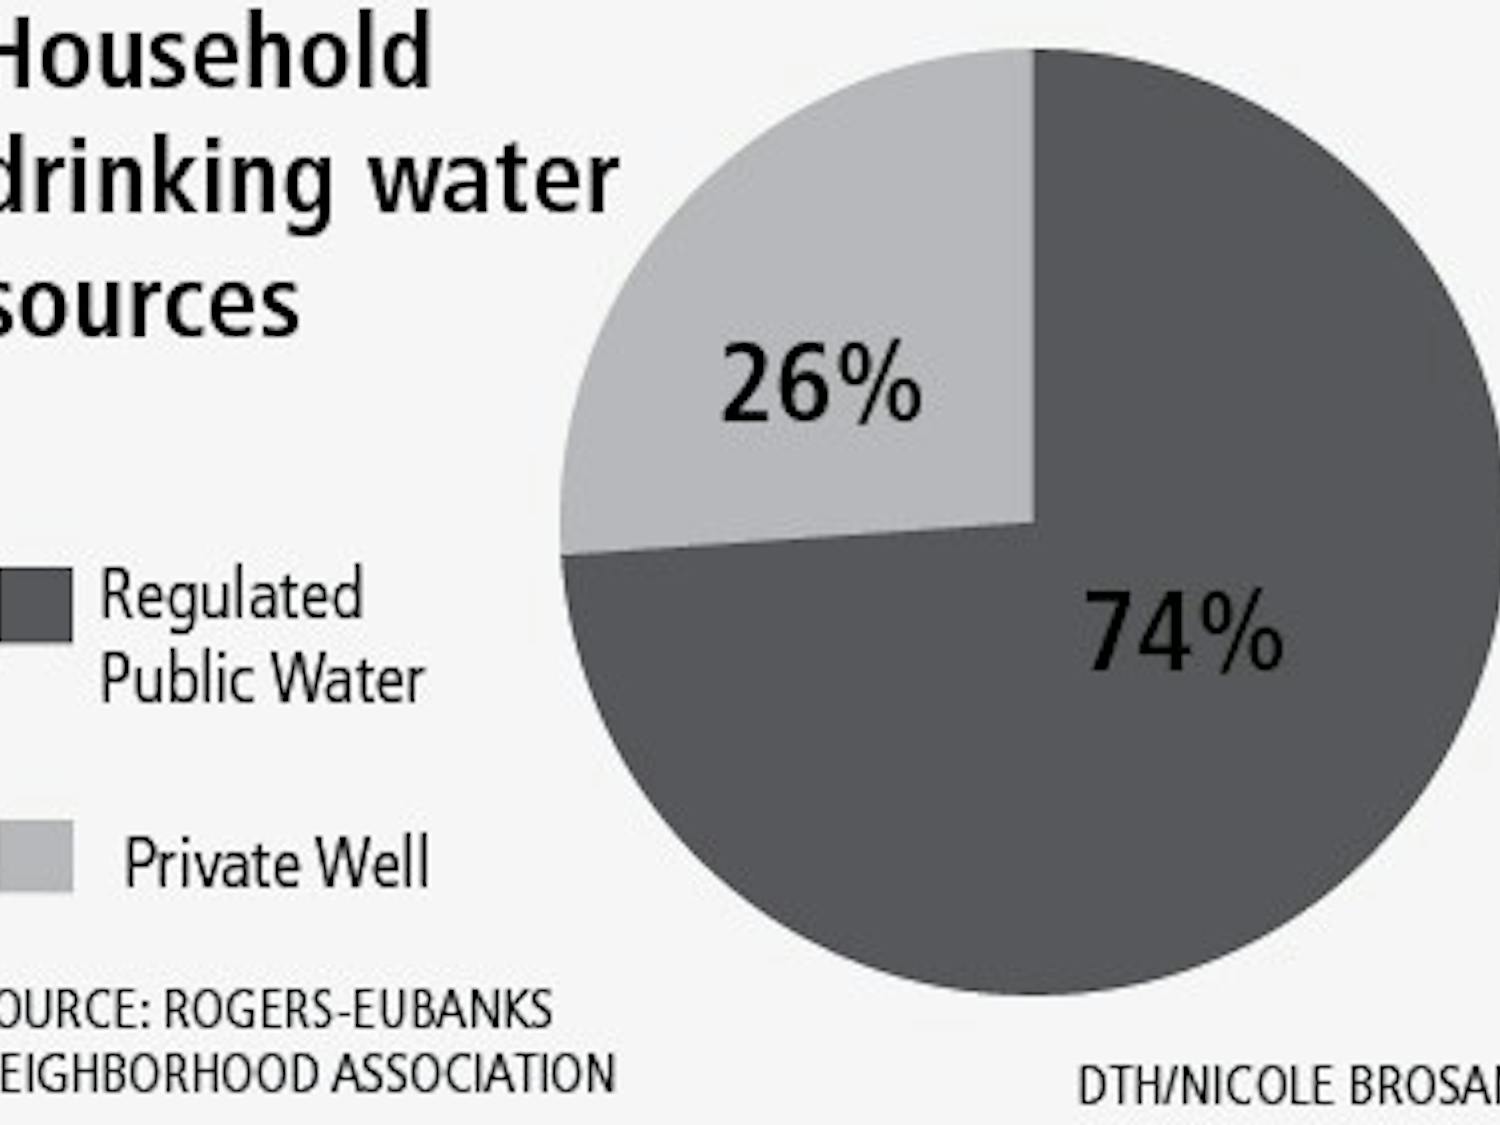 Household drinking water sources